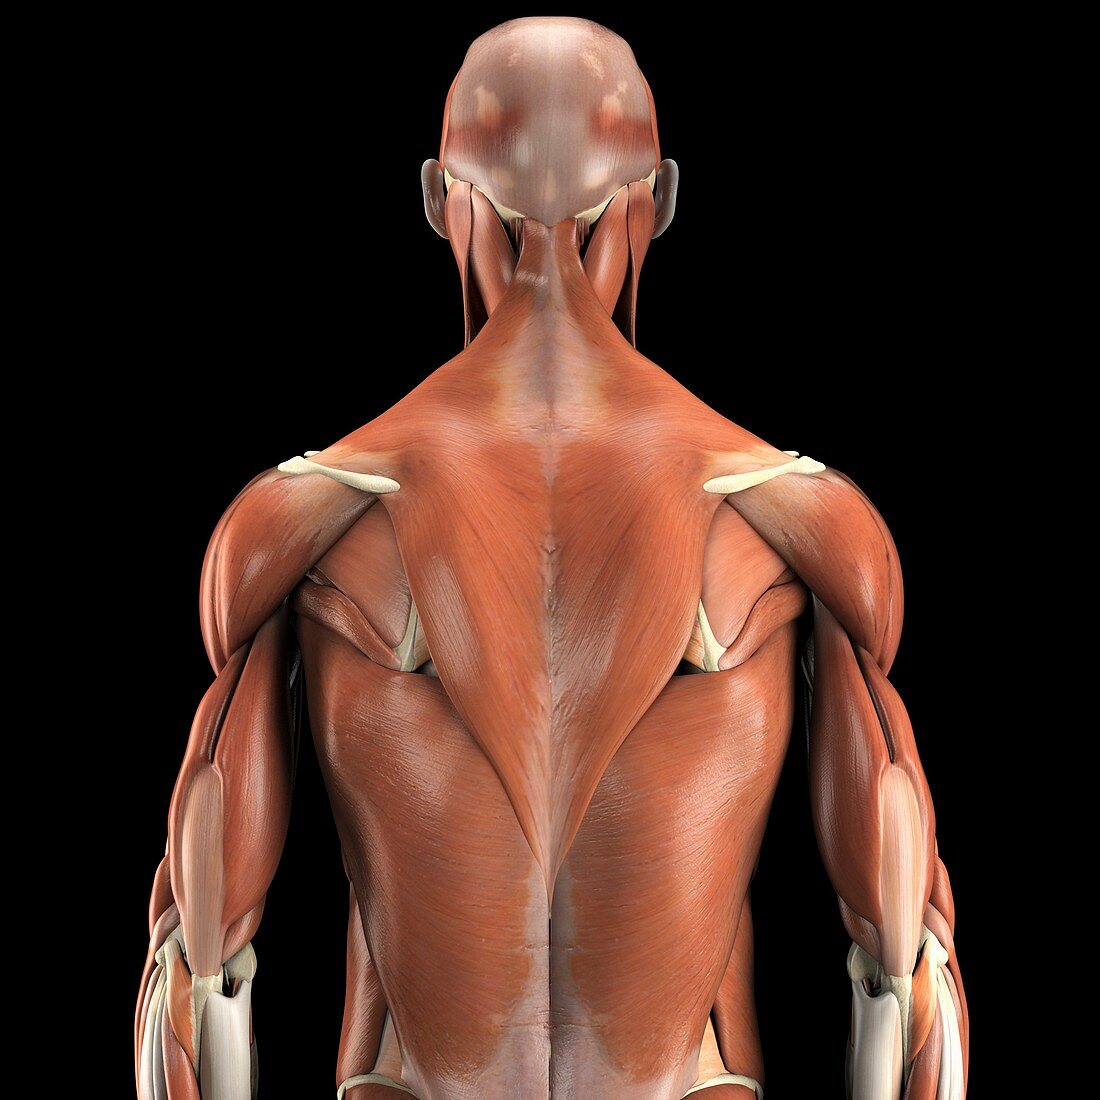 The Muscles of the Upper Body, artwork